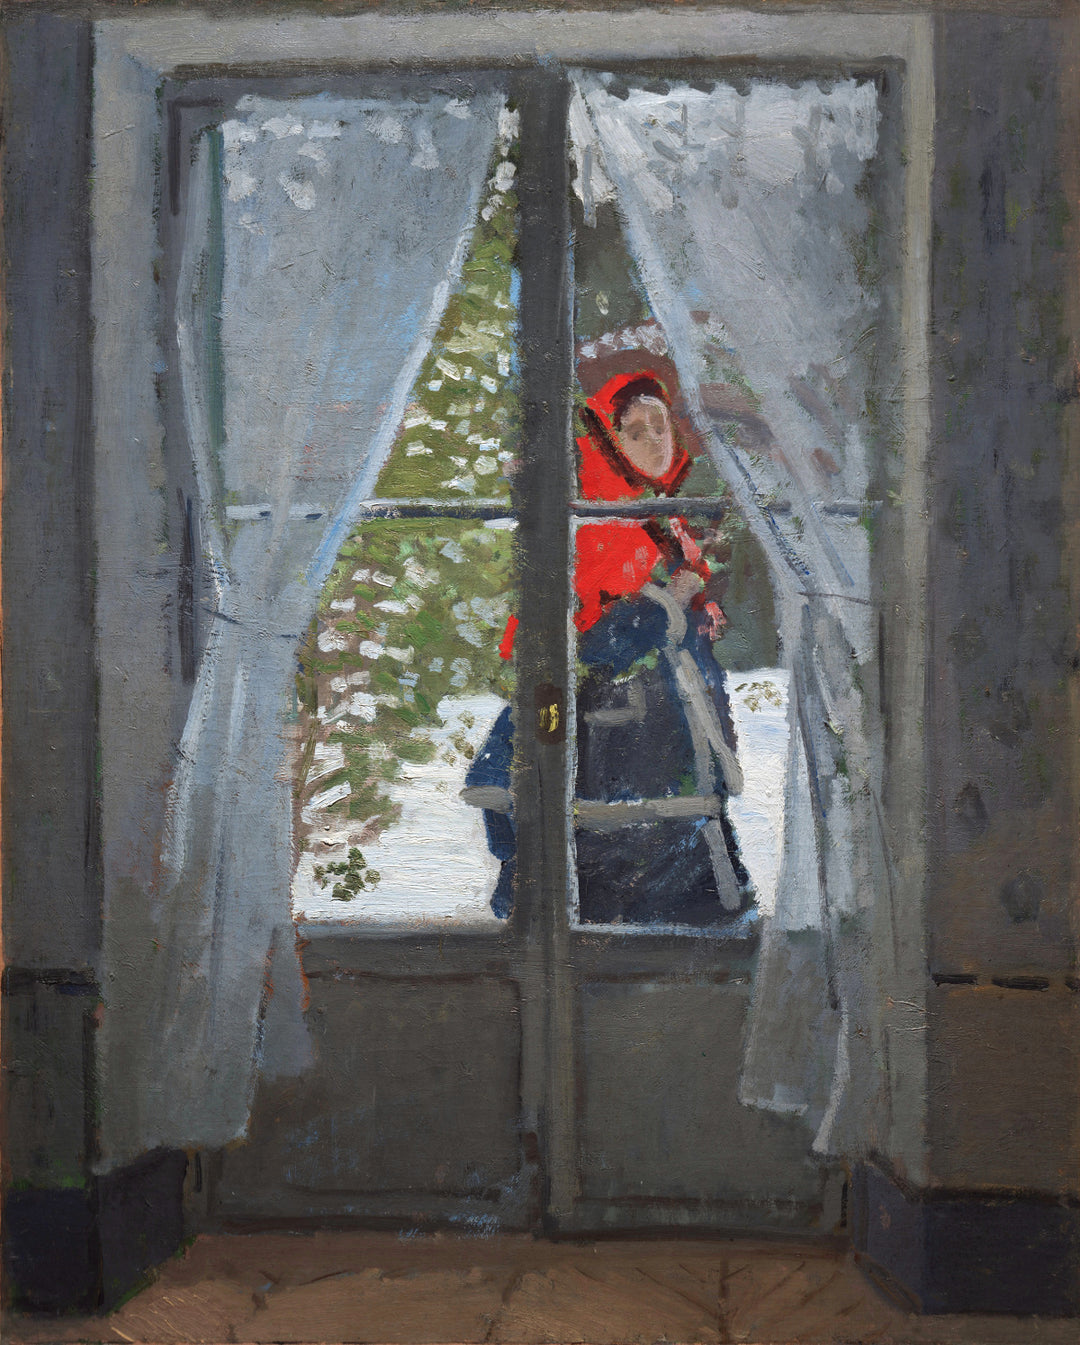 The Red Cape (Madame Monet) by Claude Monet. Reproduction wall art, oil painting on canvas, blue surf art